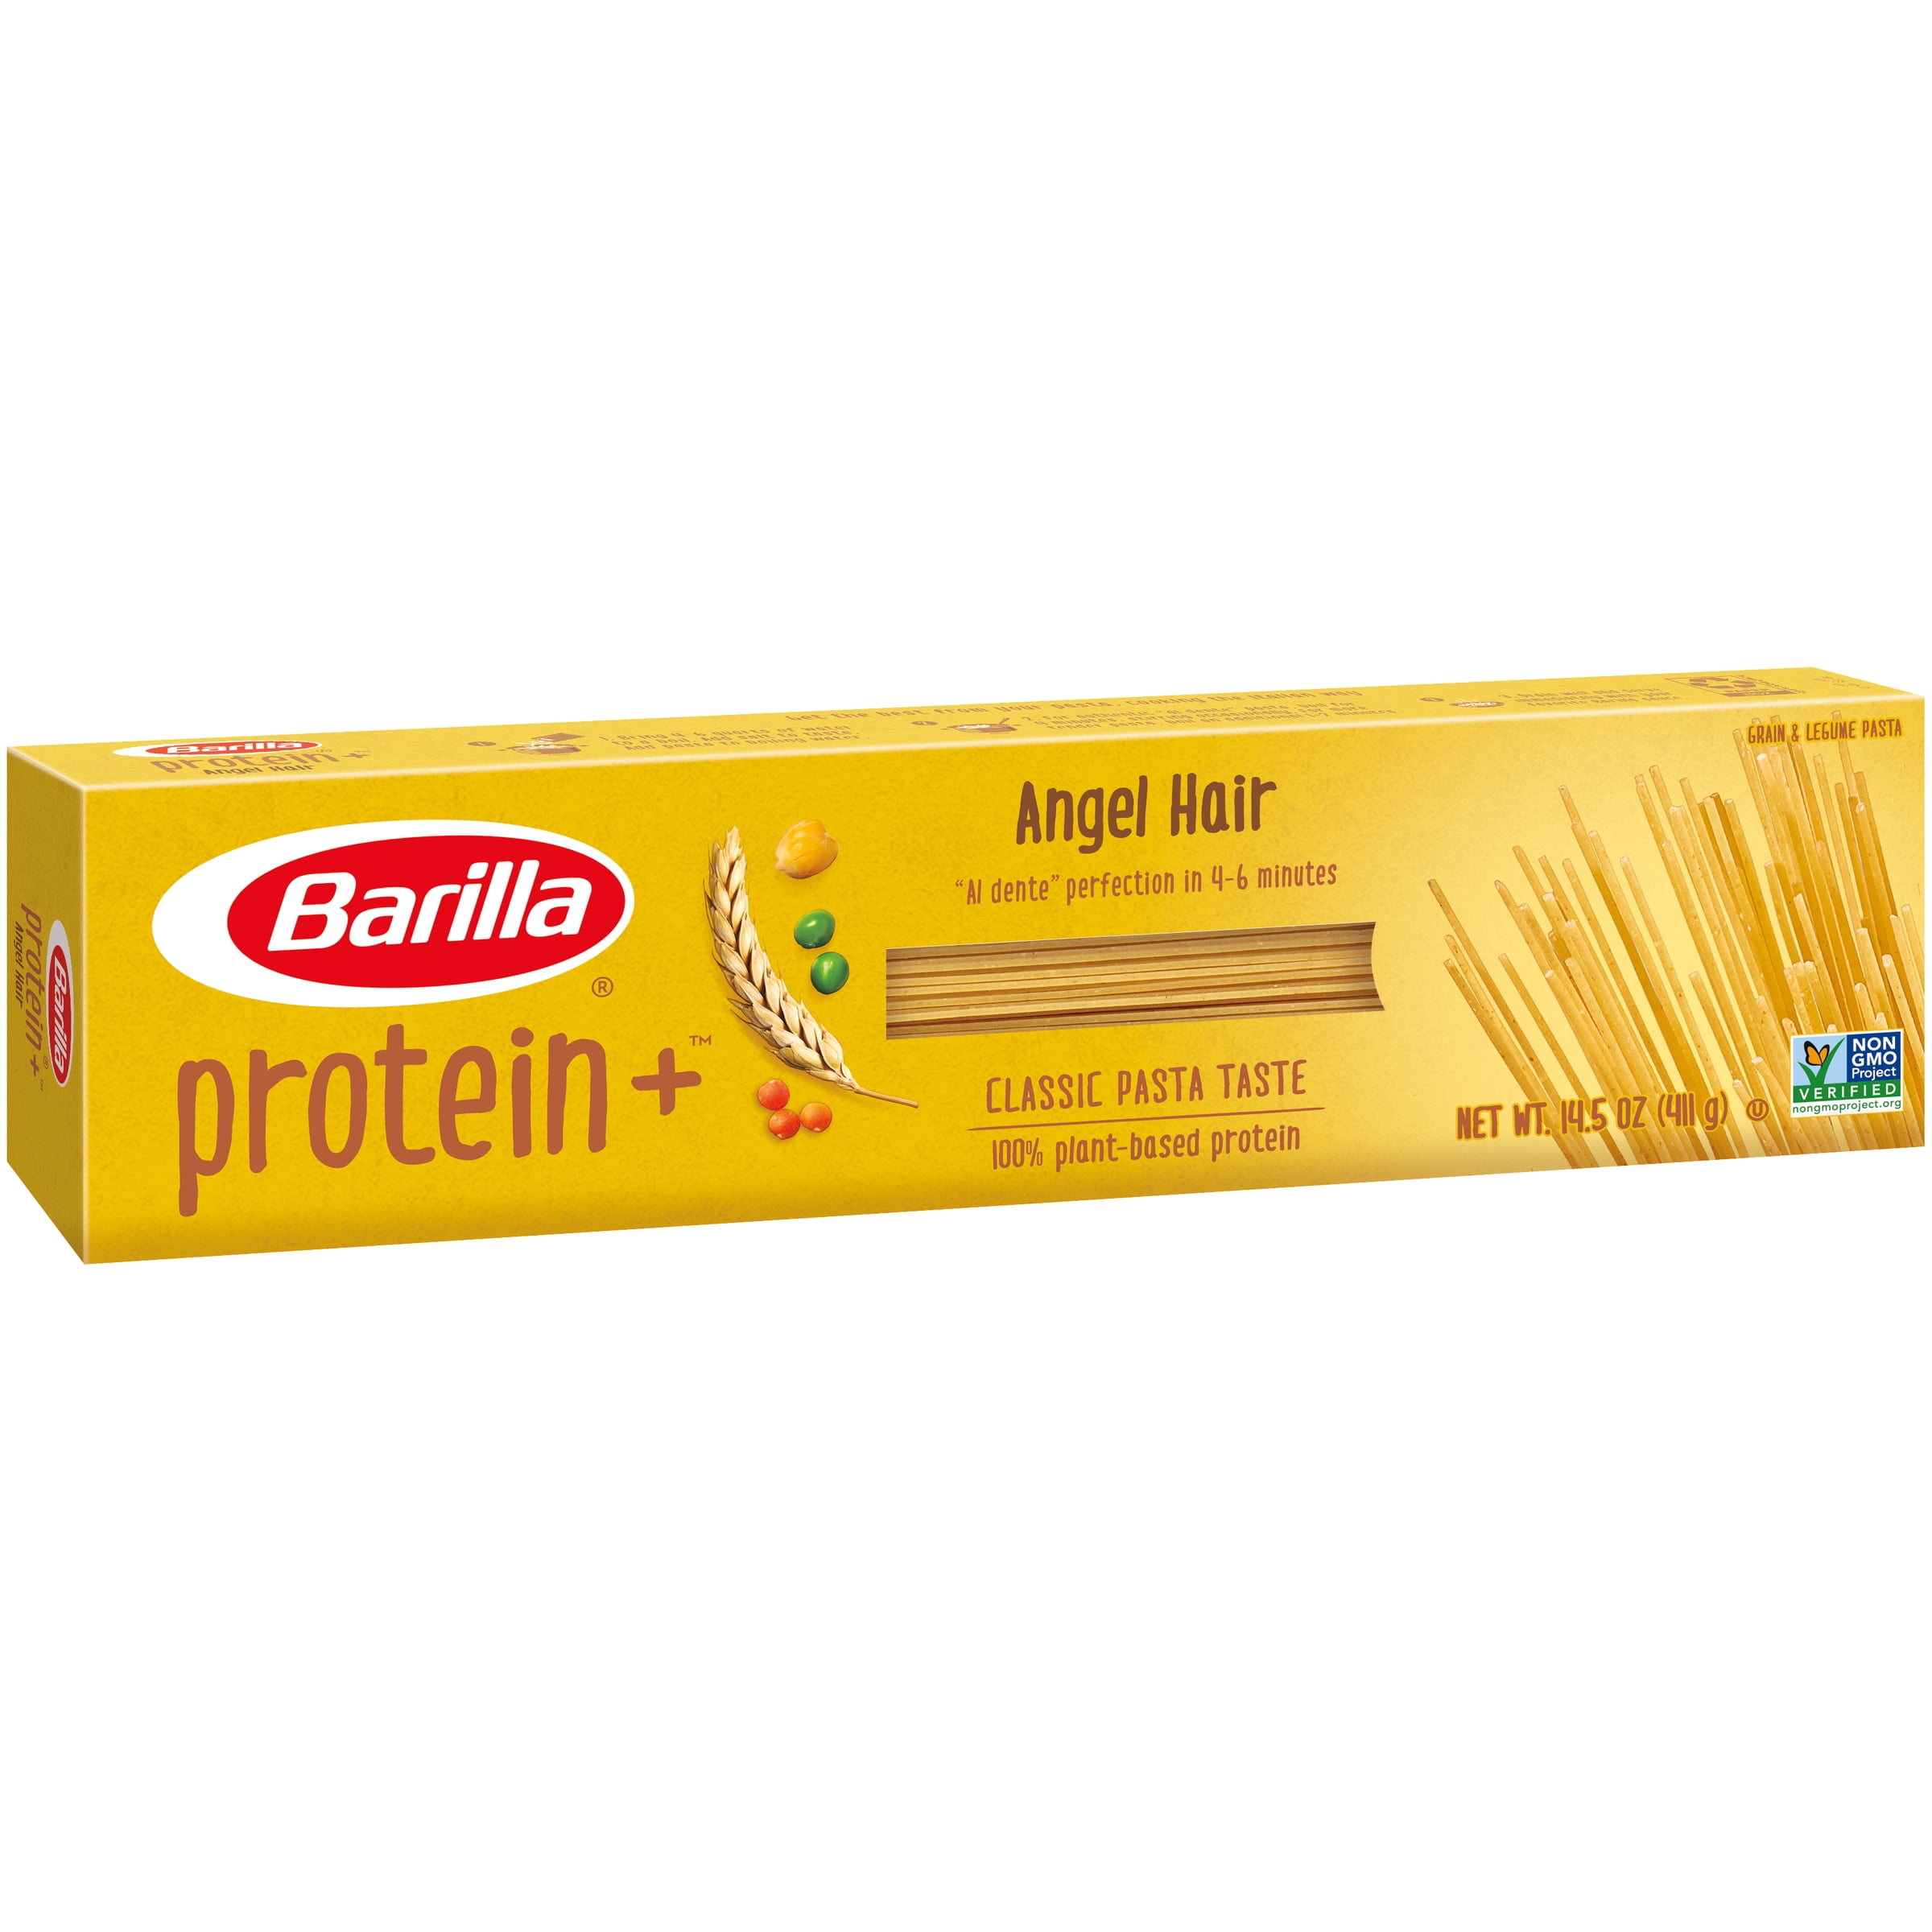 Barilla Plus Angel Hair Pasta Nutrition Facts - Nutrition Ftempo